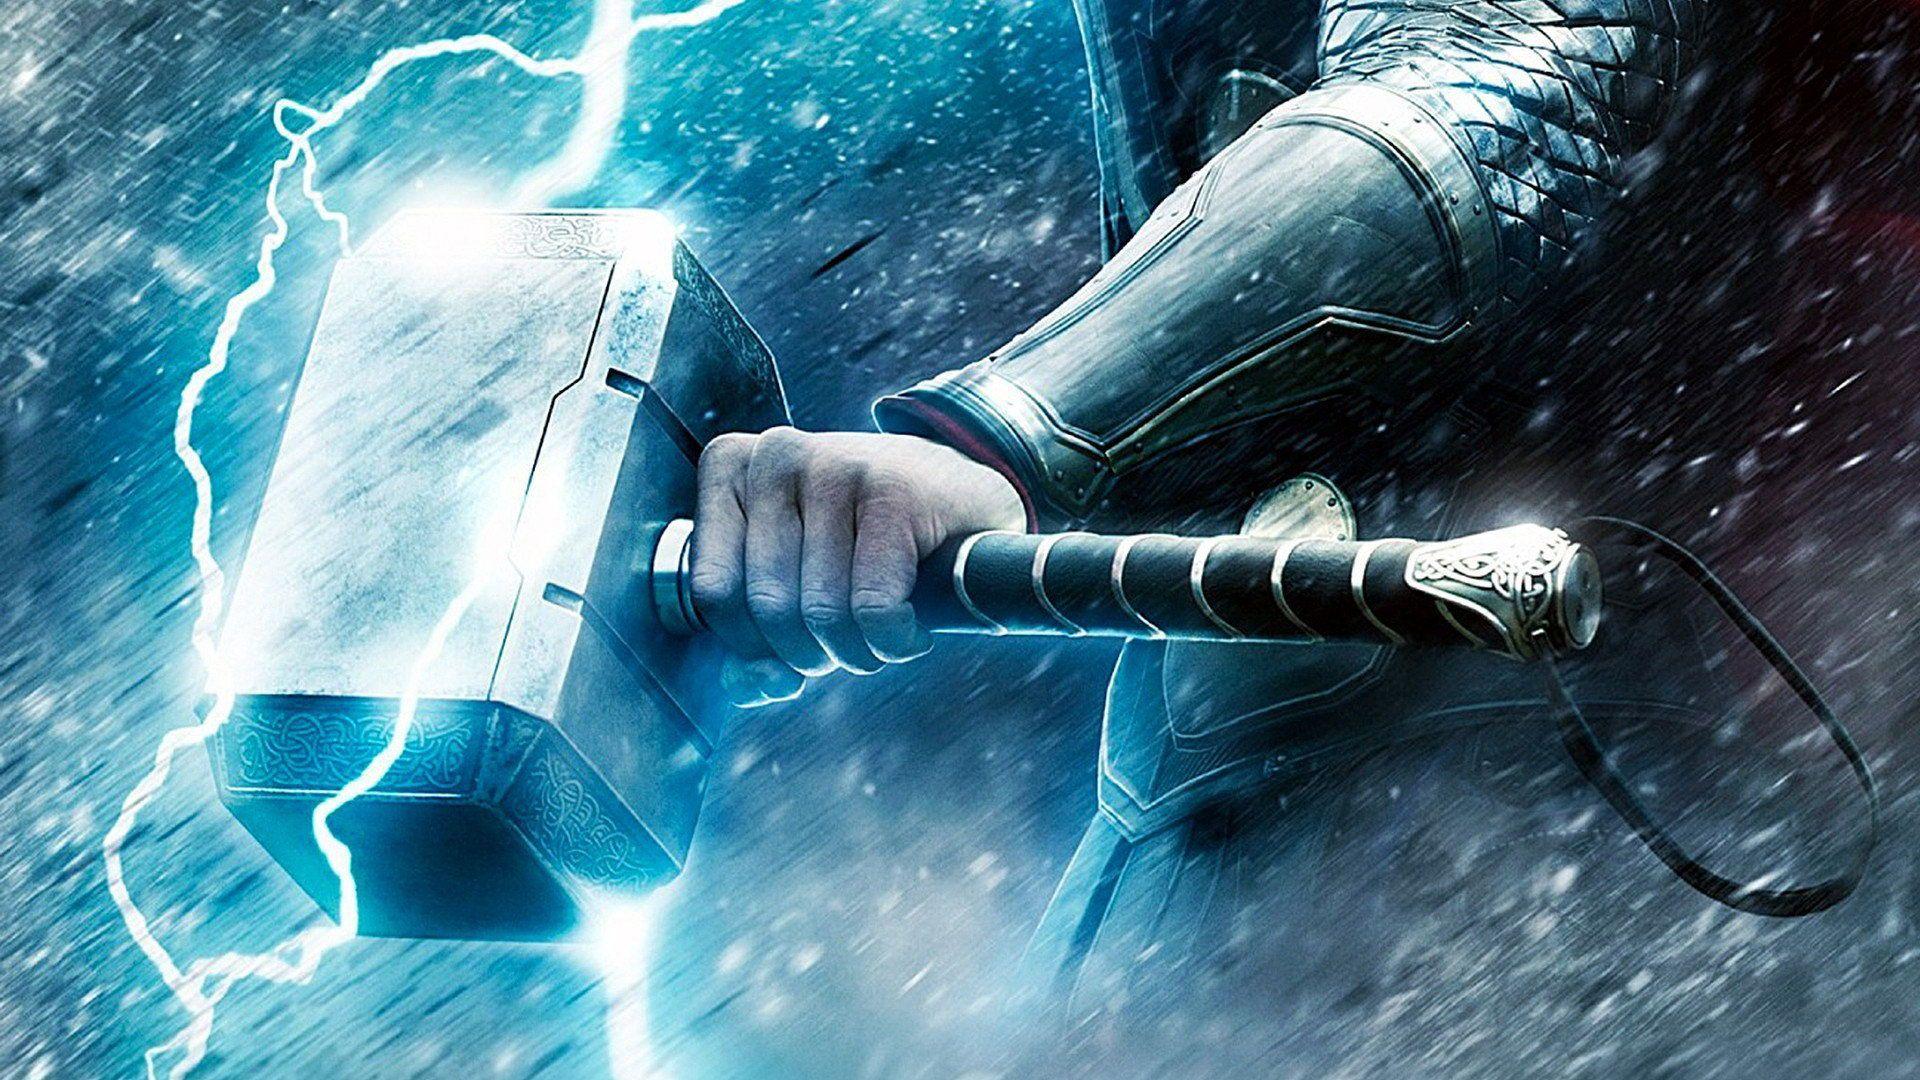 Thor Catches Mjolnir iPhone Wallpaper  iPhone Wallpapers  iPhone  Wallpapers